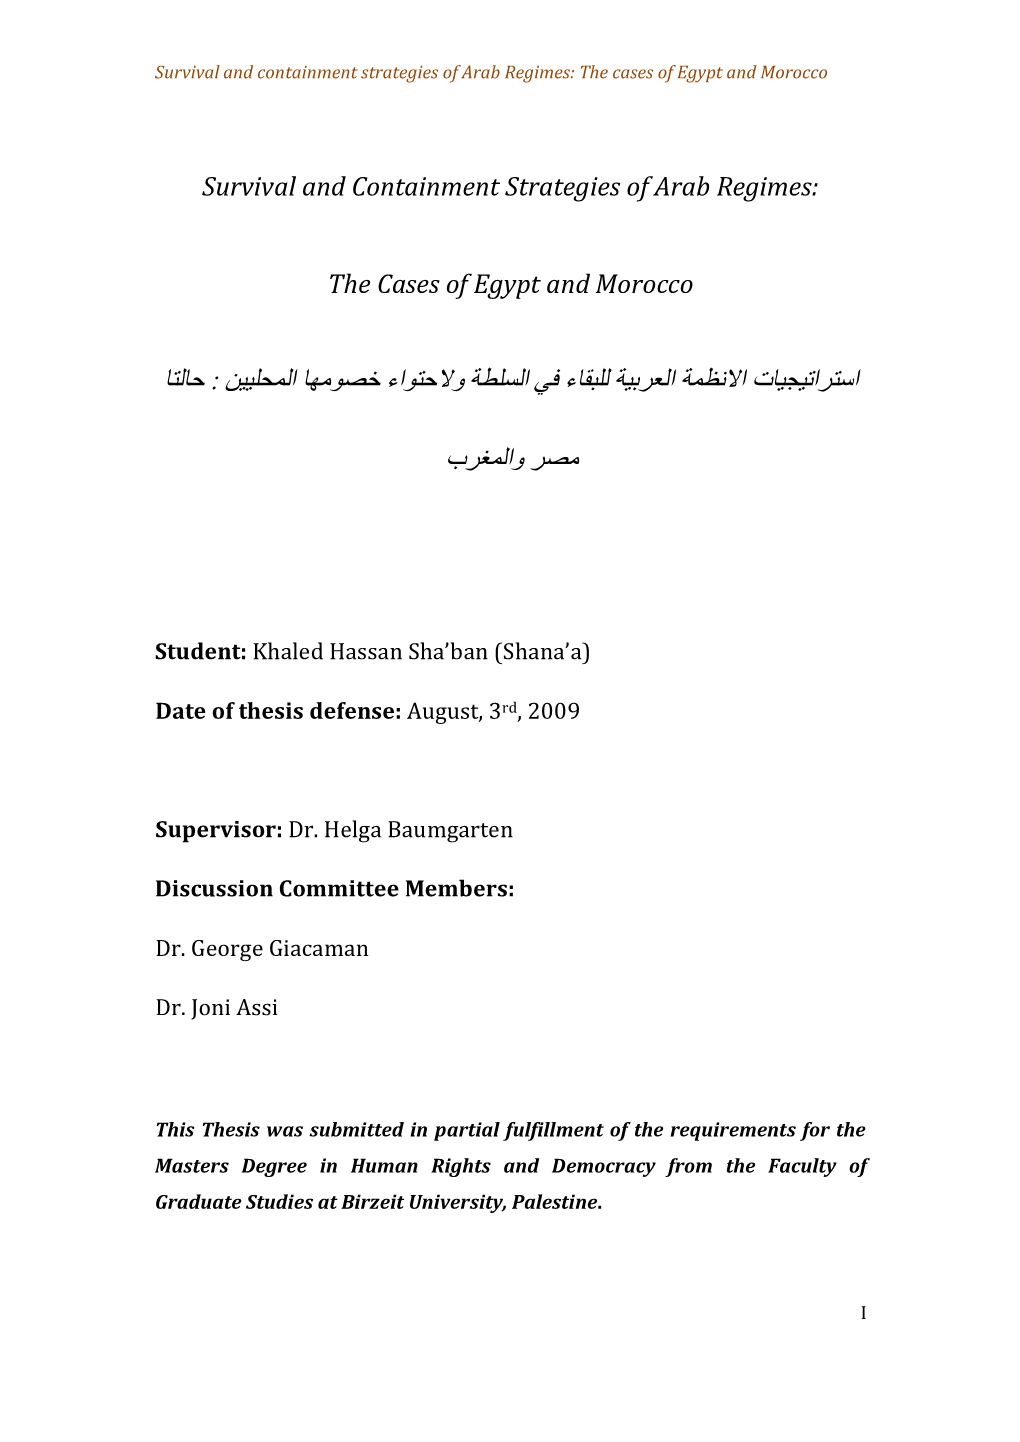 Survival and Containment Strategies of Arab Regimes: the Cases of Egypt and Morocco